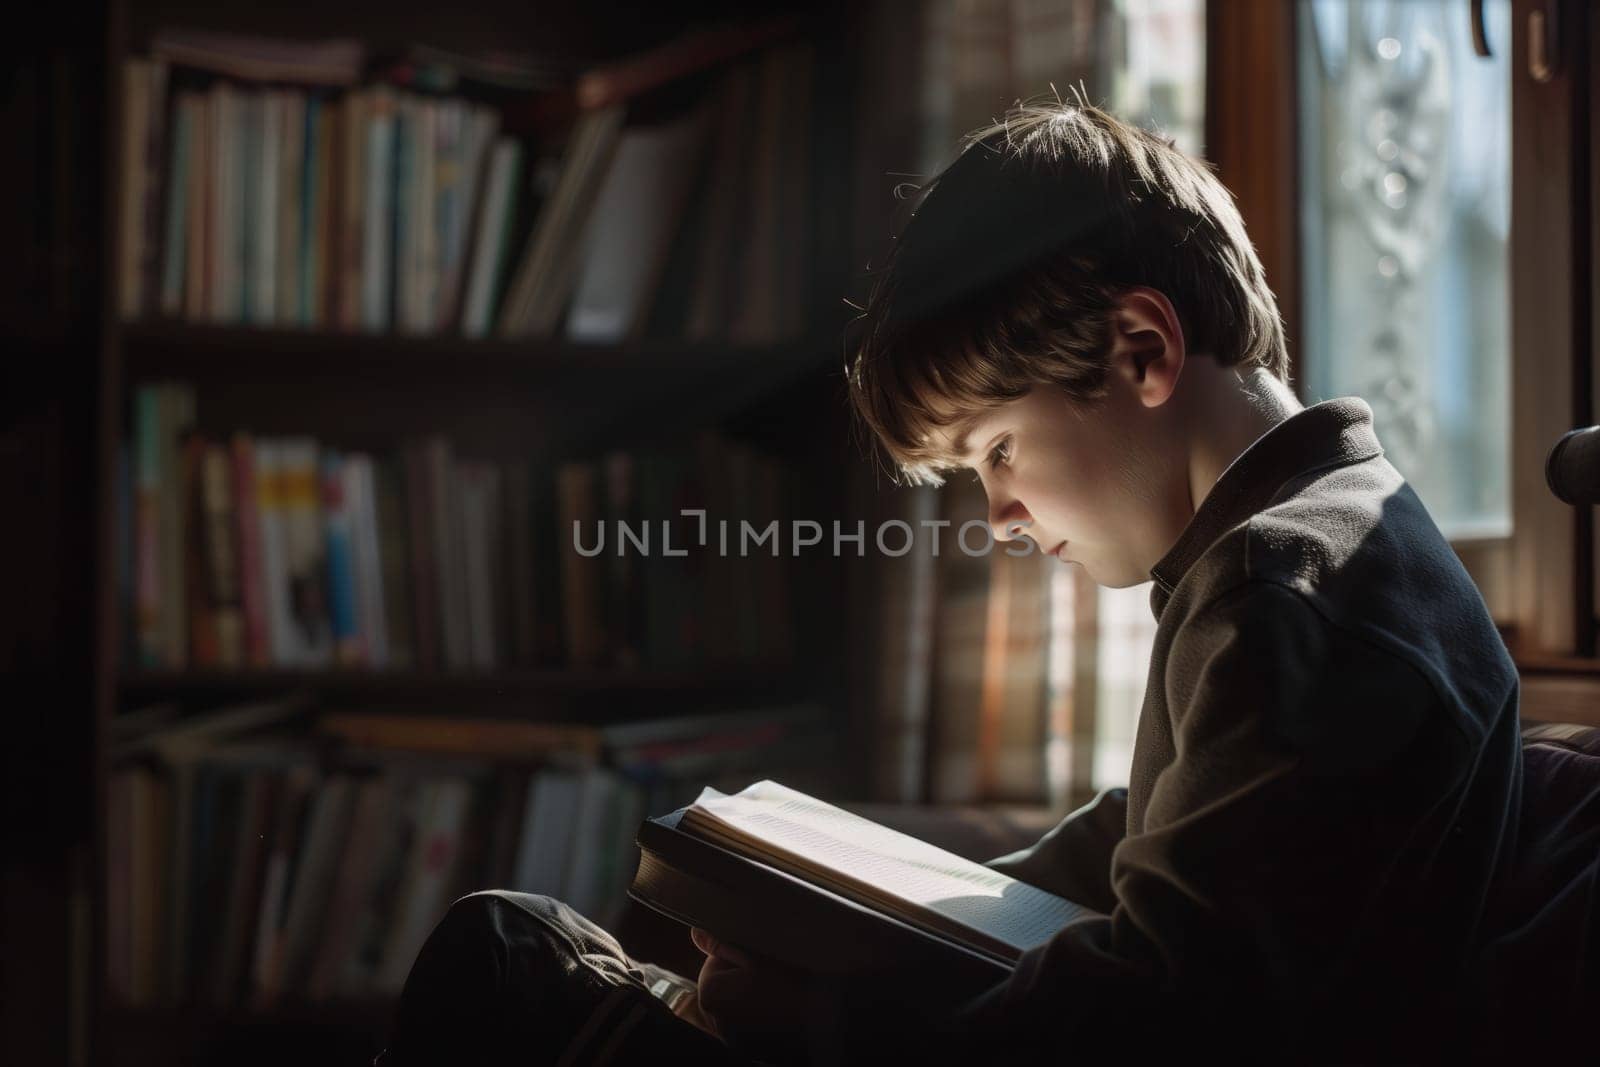 A boy is seated in front of a wooden bookcase, engrossed in reading a publication. The shelf is filled with books, creating a backdrop of darkness. His eyewear reflects the art of the building font